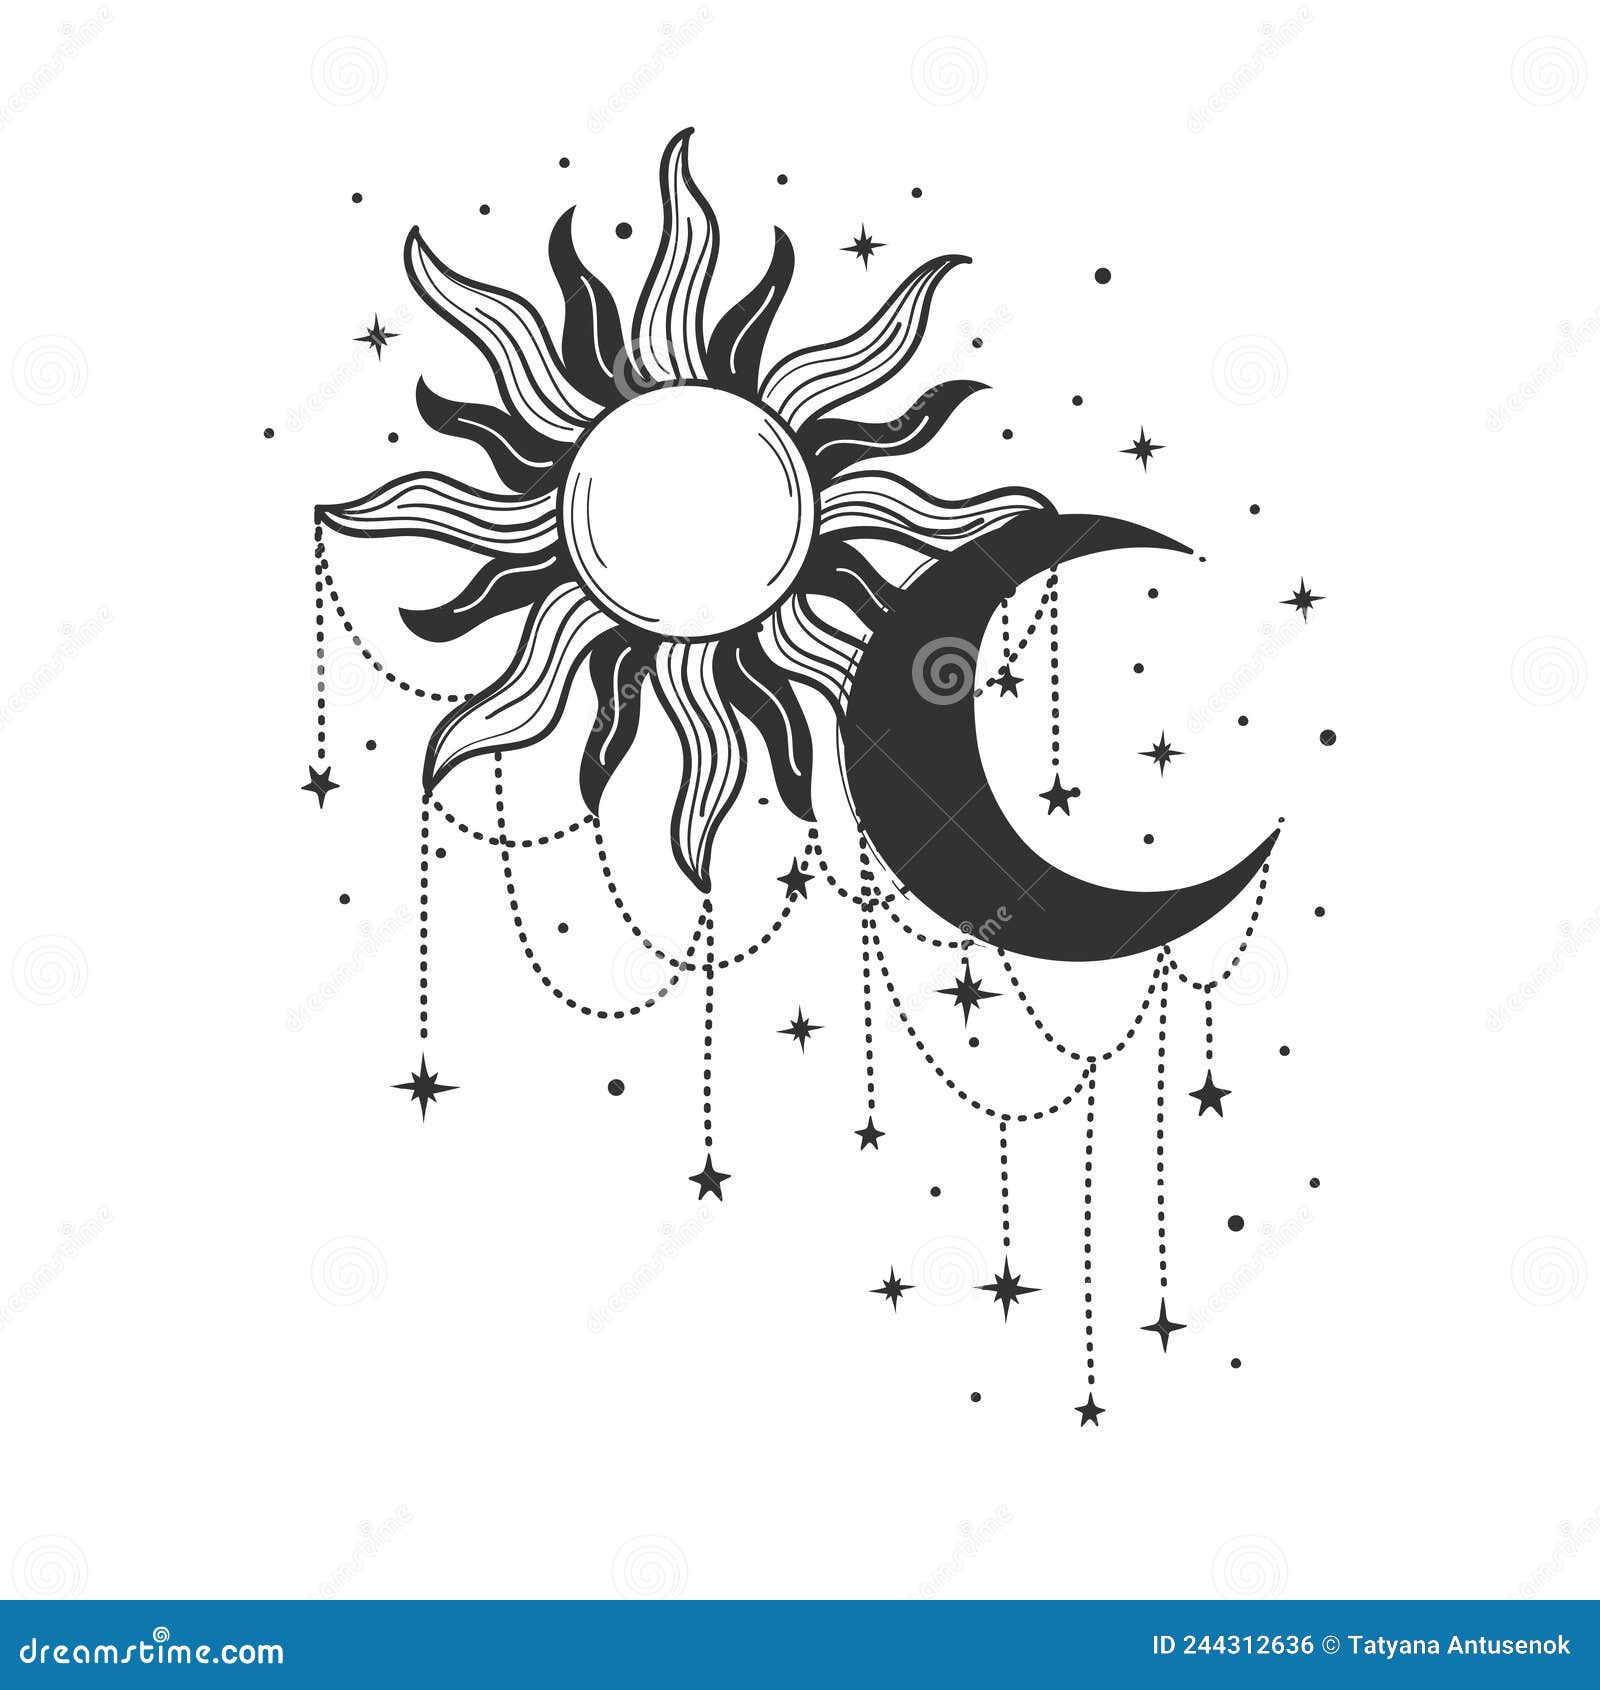 sky print print, sun and crescent moon with bead and star embellishments.    on white